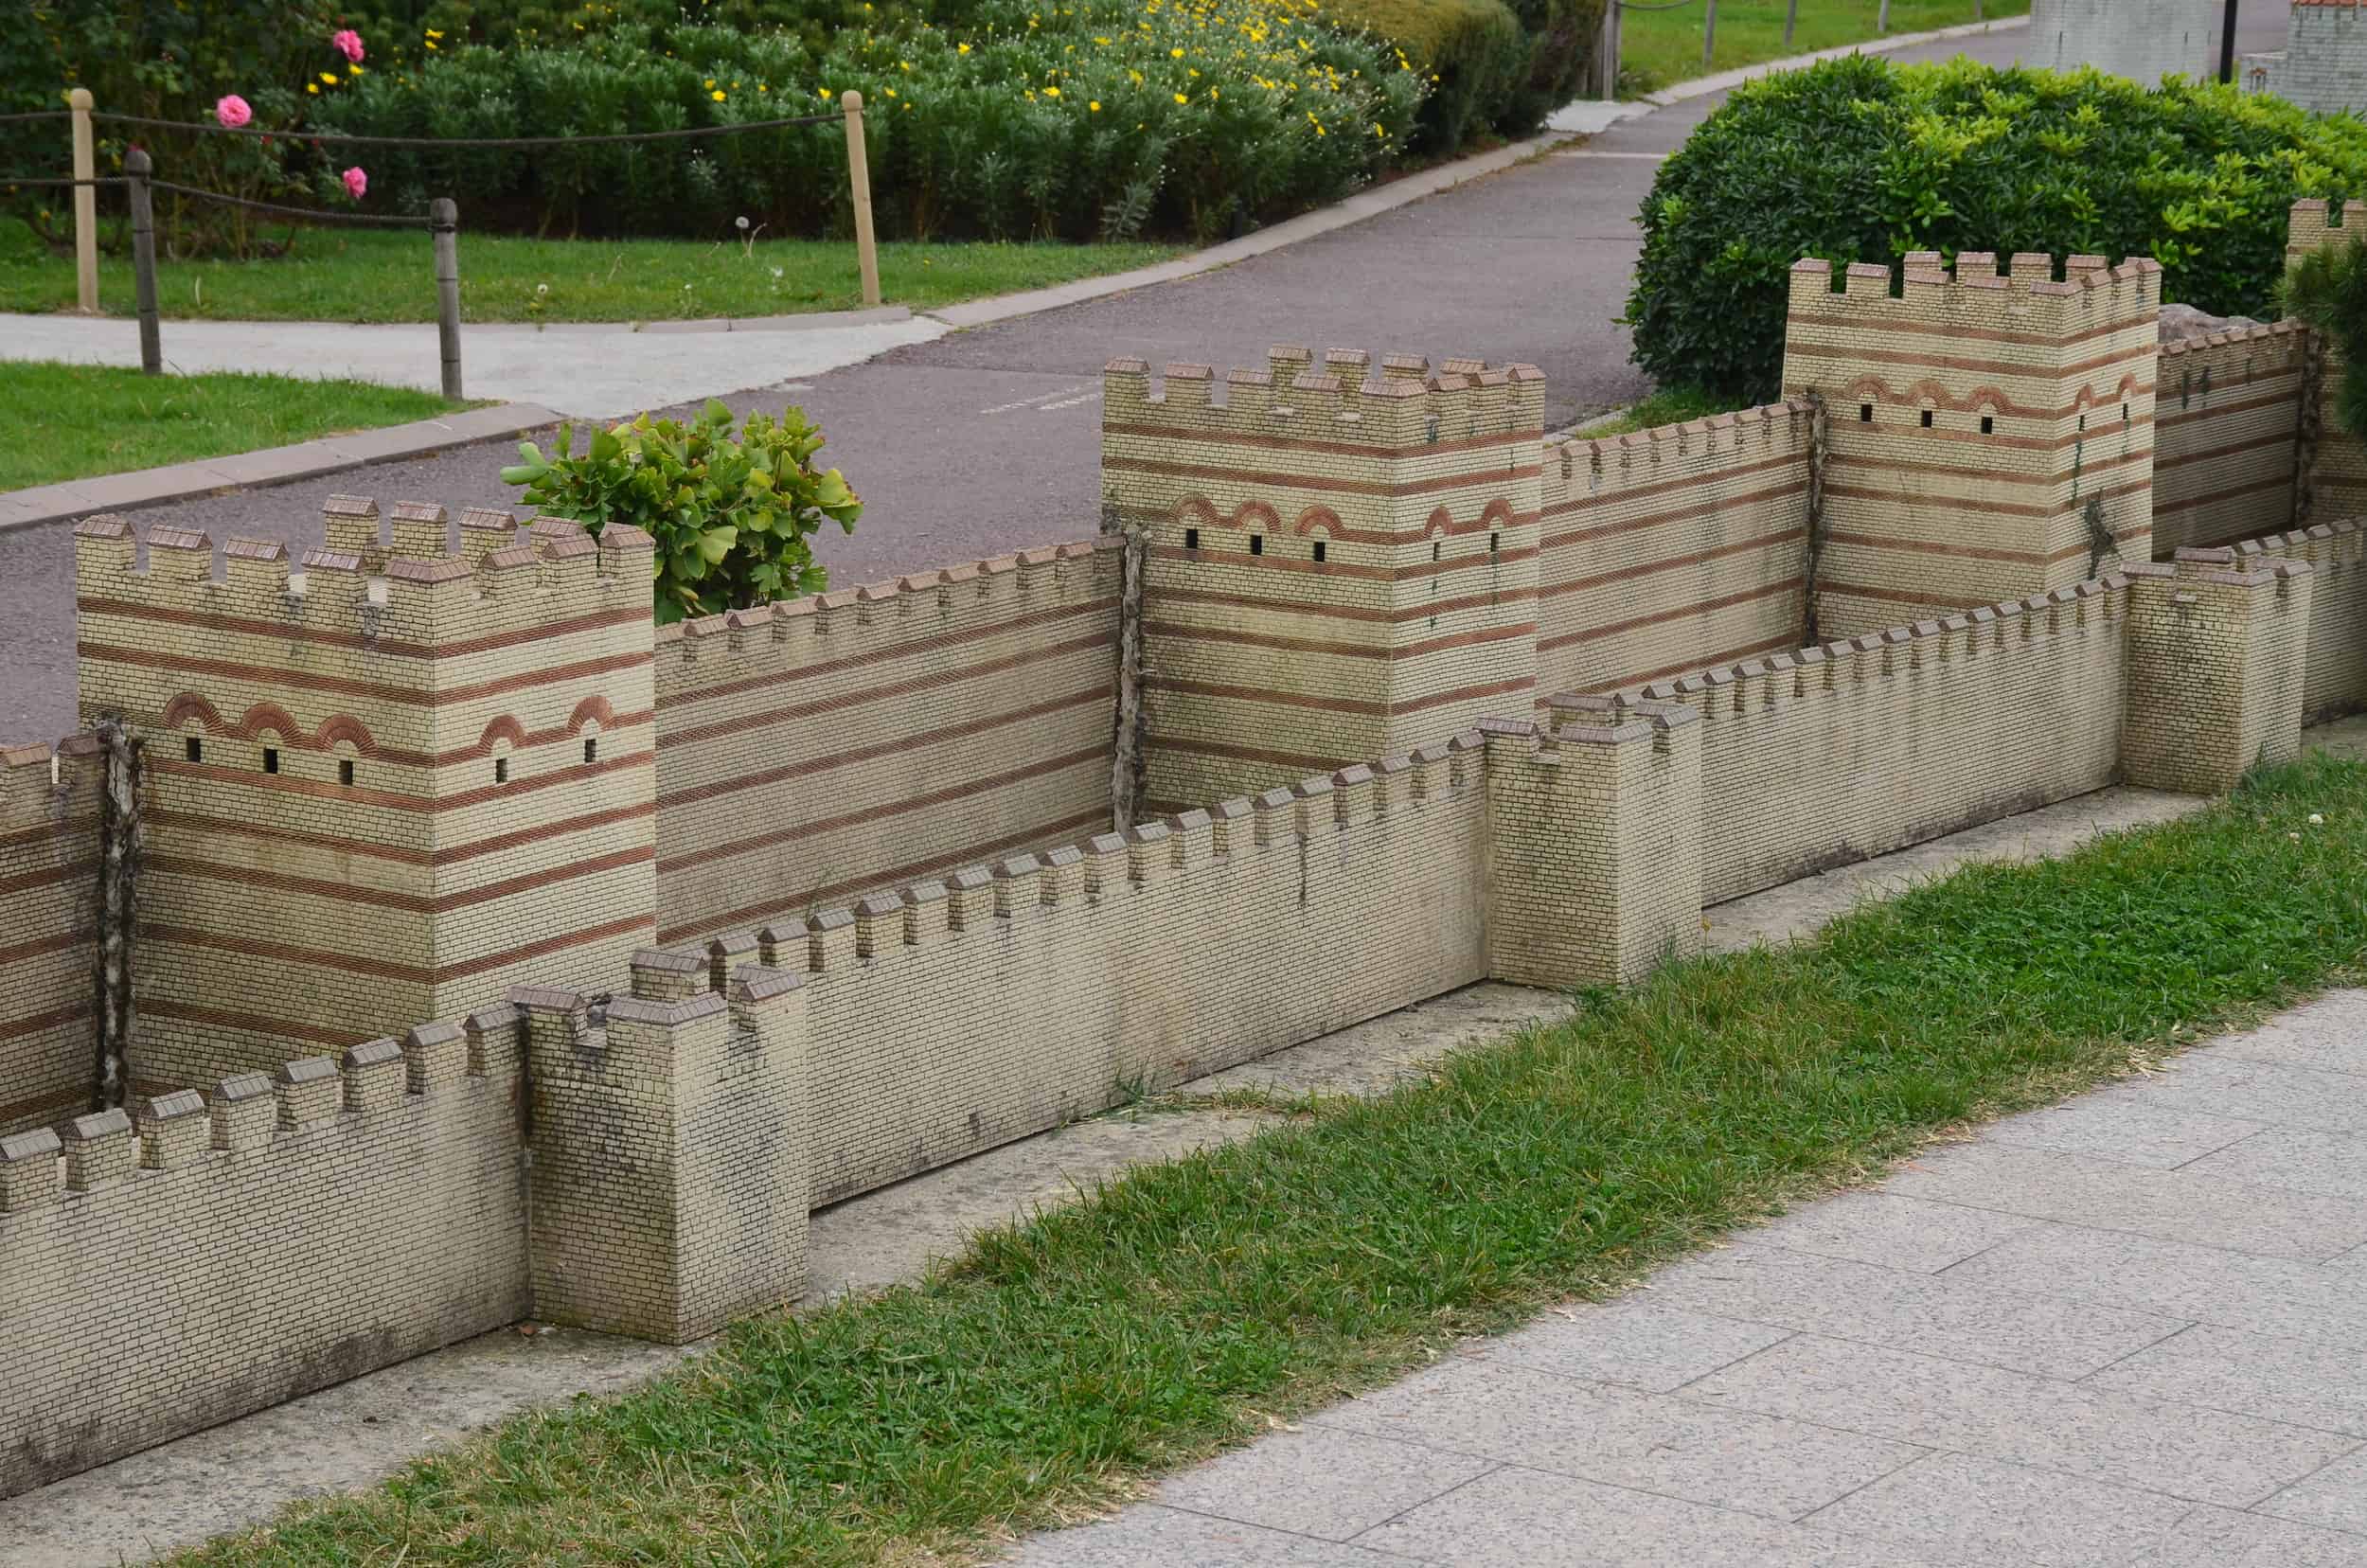 Model of the Theodosian Walls of Constantinople, 5th century